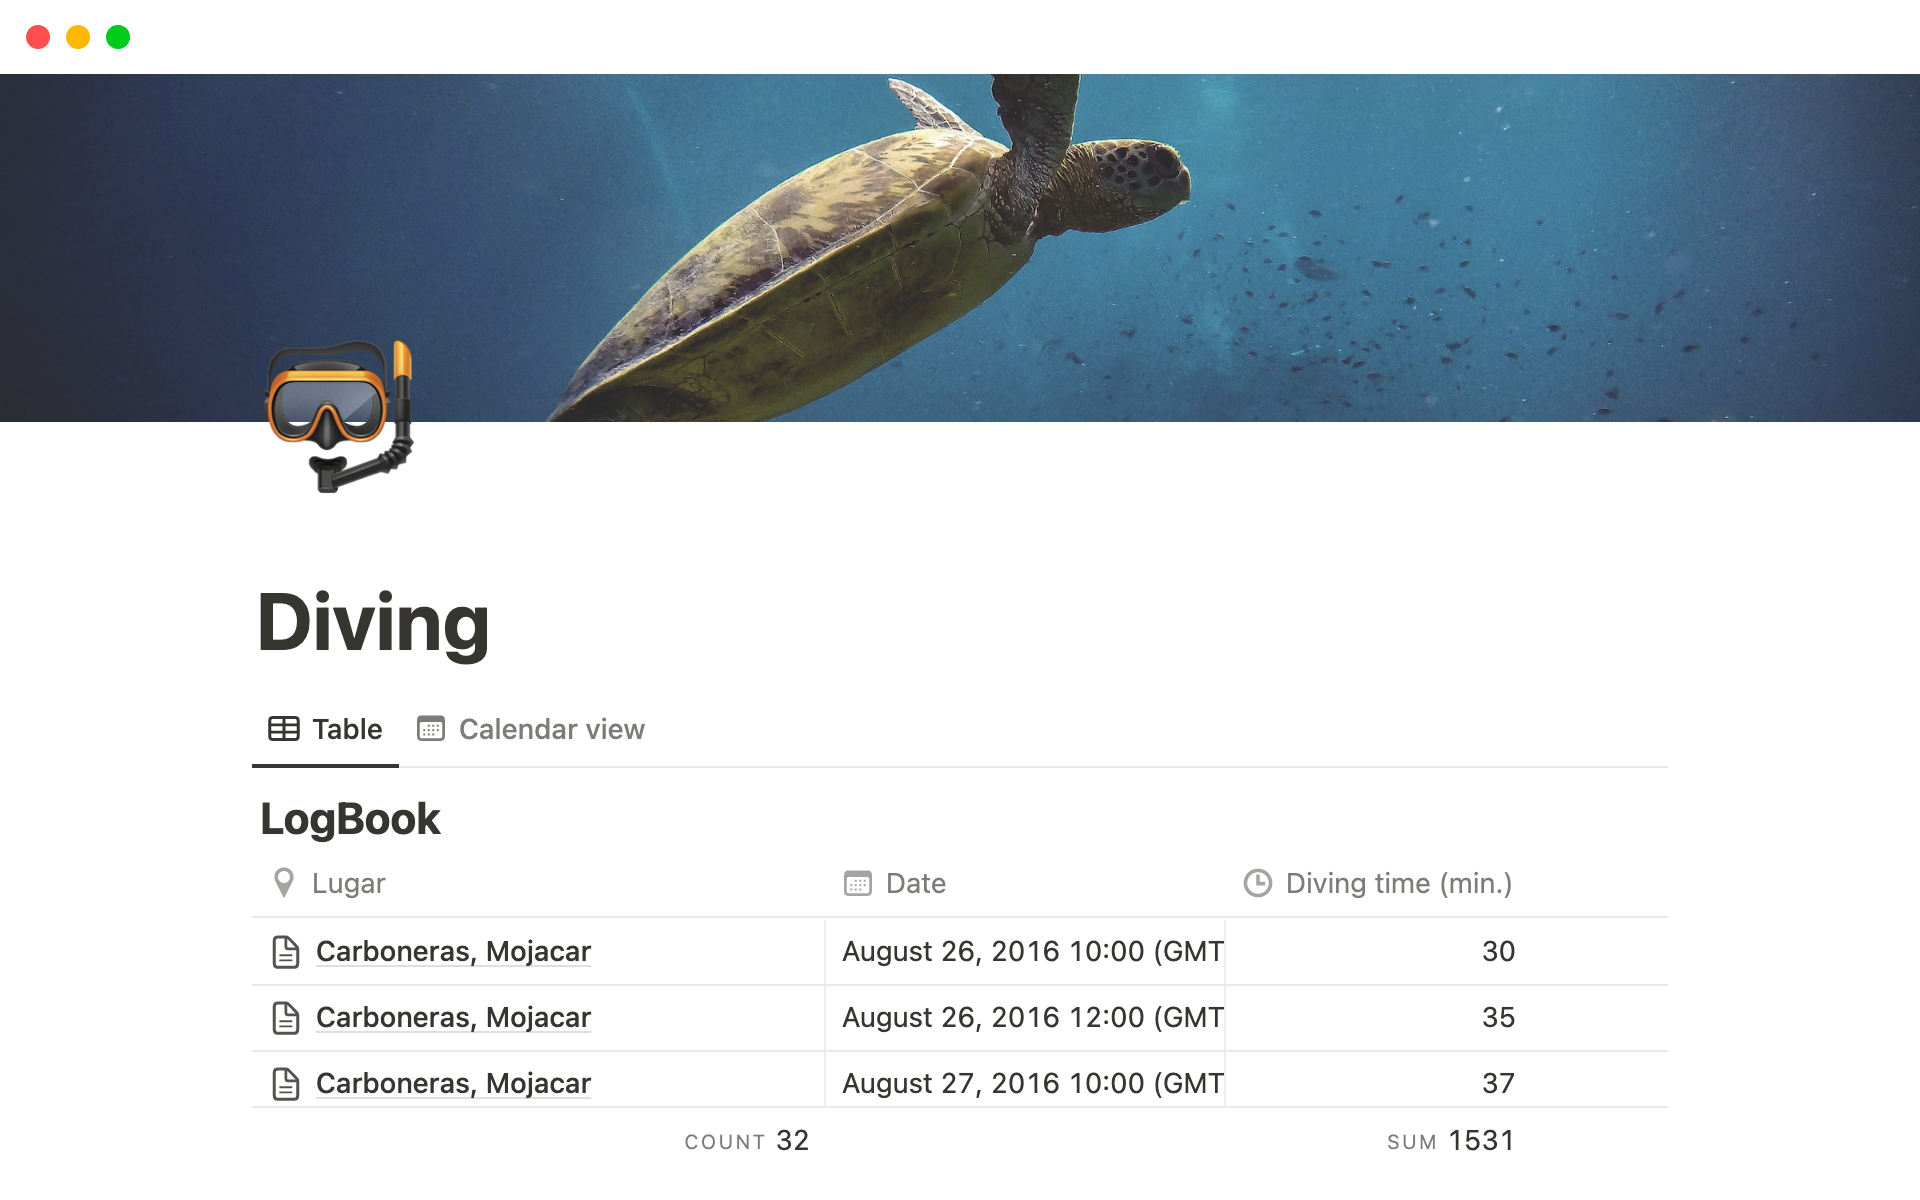 A database where you can save your dives' data.